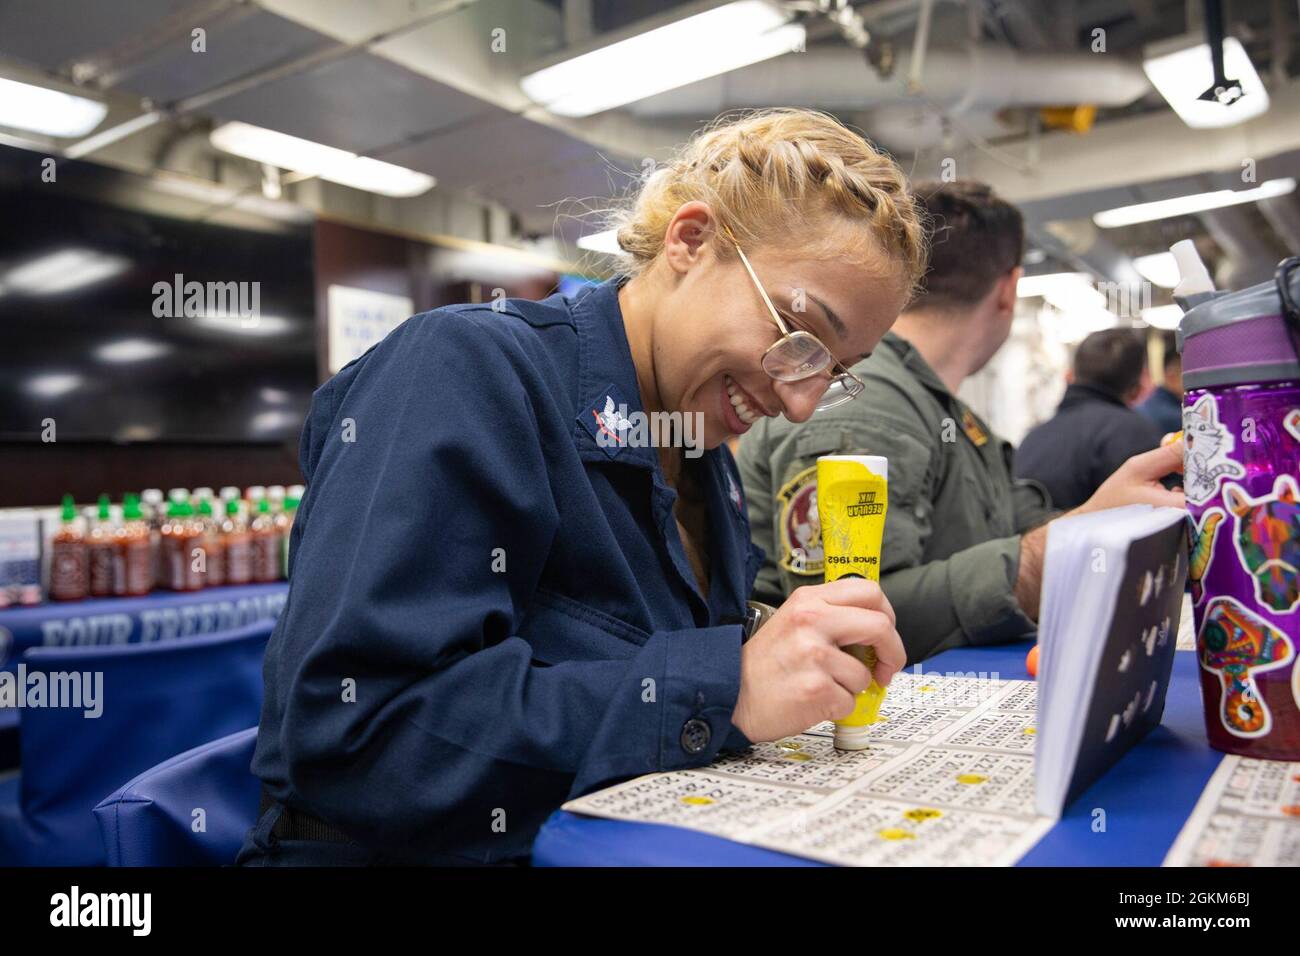 ATLANTIC OCEAN (May 23, 2021) Electronics Technician 3rd Class Jessica Quinn marks a bingo card on the mess decks of the Arleigh Burke-class guided-missile destroyer USS Roosevelt (DDG 80), May 23, 2021.  Roosevelt is participating in At-Sea Demo/Formidable Shield, conducted by Naval Striking and Support Forces NATO on behalf of U.S. Sixth Fleet, is a live-fire integrated air and missile defense (IAMD) exercise that improves Allied interoperability using NATO command and control reporting structures. Stock Photo